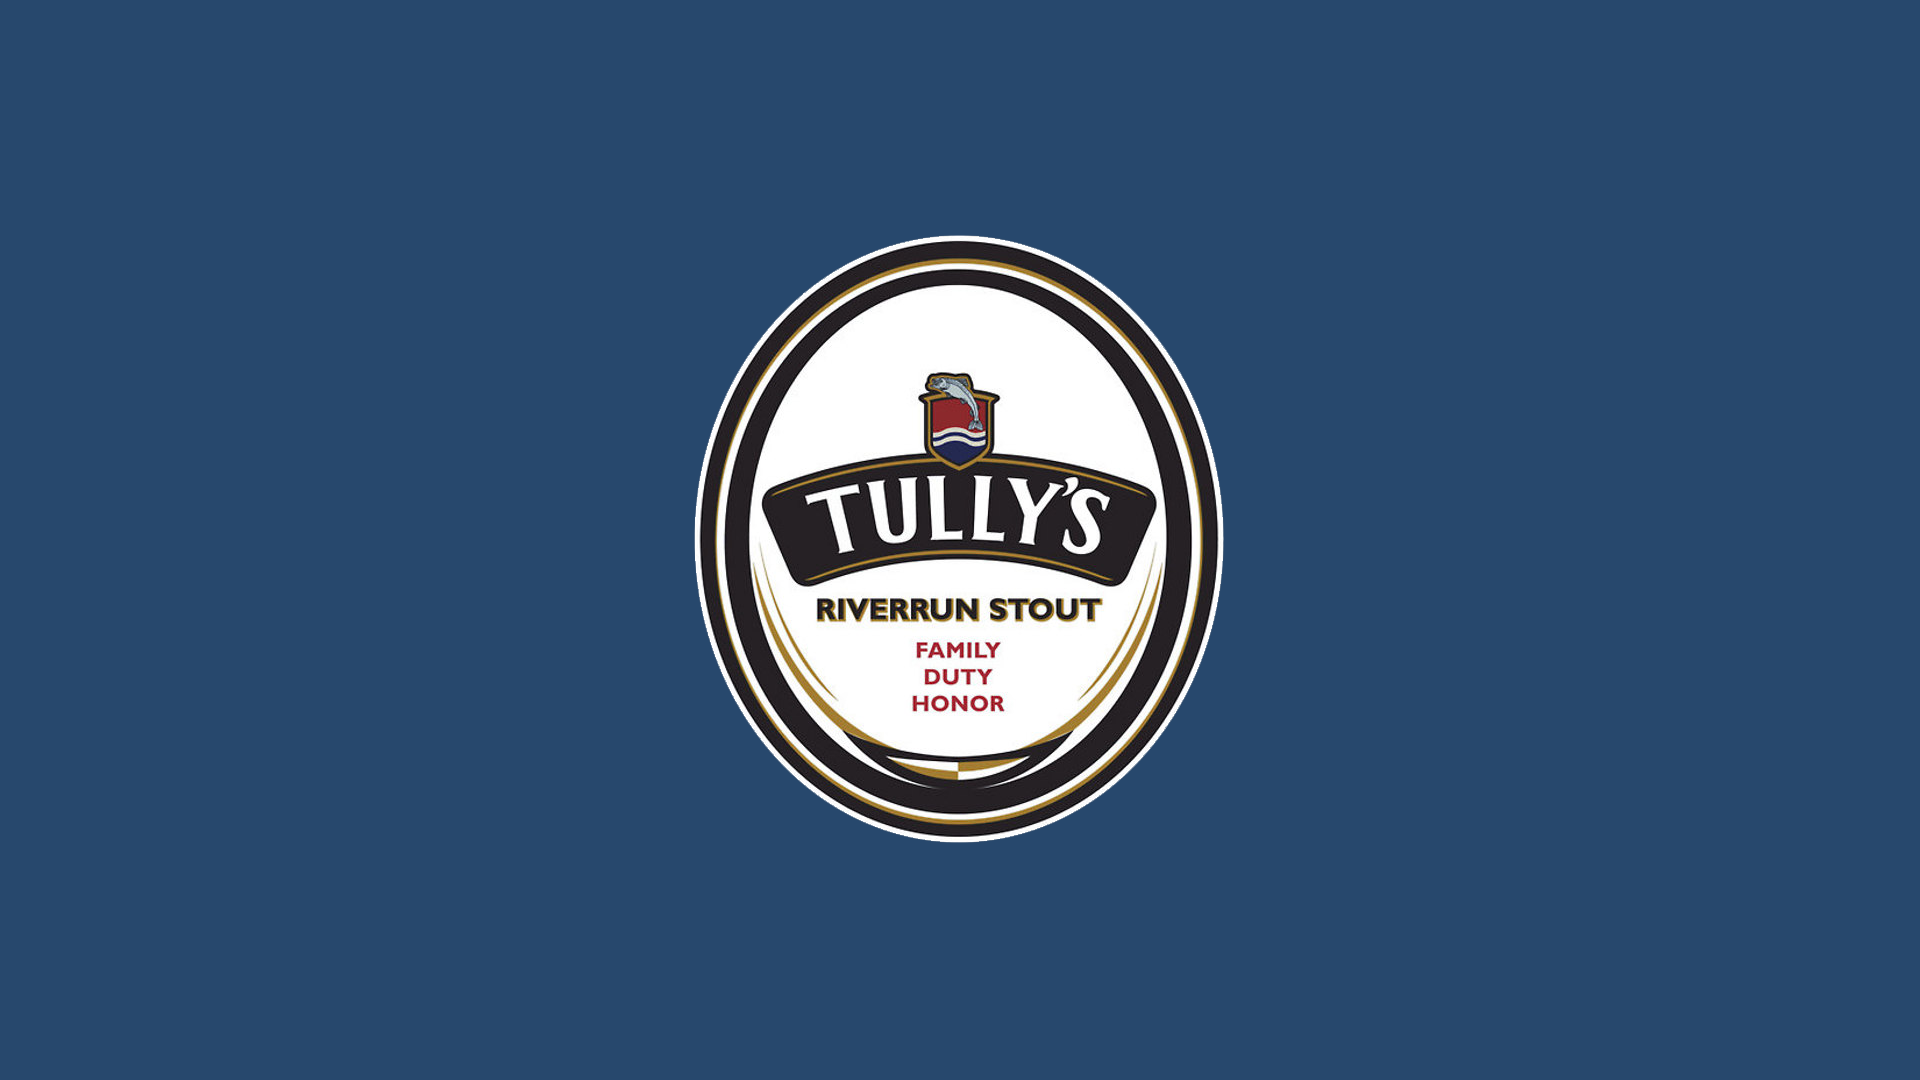 Game Of Thrones A Song Of Ice And Fire House Tully Beer 1920x1080